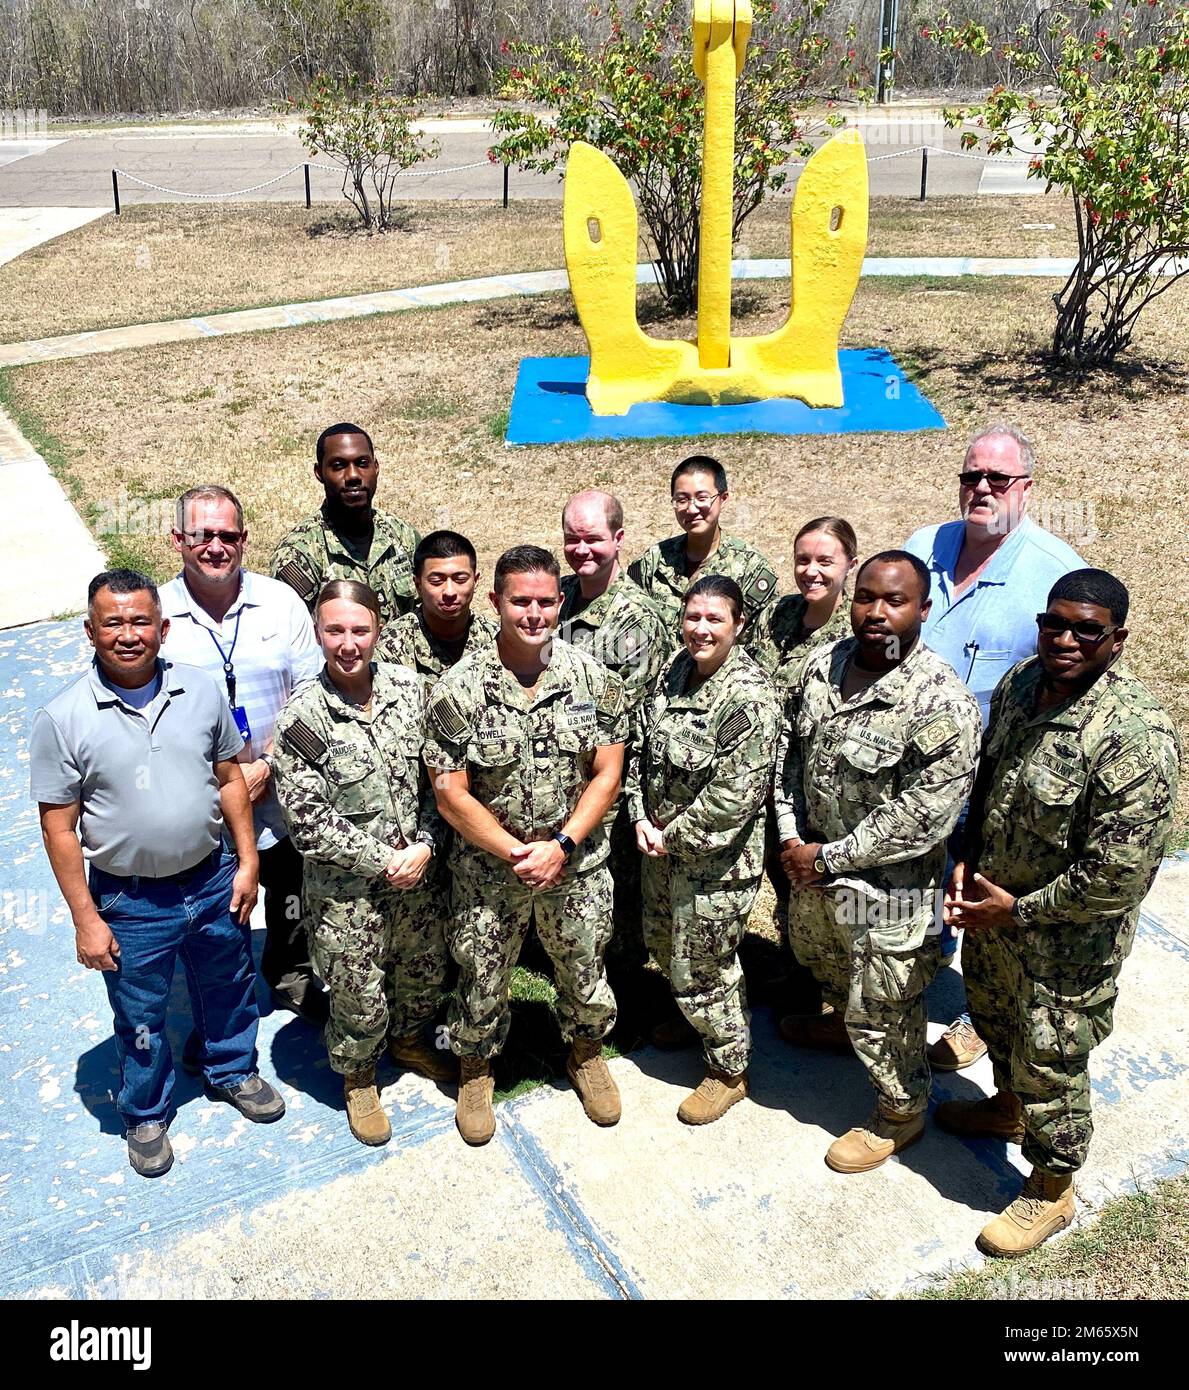 Members of the US NMRTC Guantanamo Bay Public Health Team and visiting Preventive Medicine team, temporarily assigned, pose for a picture in honor of  Public Health Week.   L to R back: Mr. Eduardo Mojica, Industrial Hygiene (IH); Mr. Todd Greenwood, Safety Manager; HMC James Bond, Preventive Medicine (PM); SN Tiahna Salahuddin, PM; Lt, Brennan, Navy Entomology Center of Excellence (NECE); Lt. Wong, NECE; Lt. Haley Barravecchia, Department Head, Preventive Medicine; Mr. George Smith, IH; L to R Front HN Jazmin Yaudes Navy Environmental and Preventive Medicine Unit, San Diego); Lt. Cmdr. Carl P Stock Photo